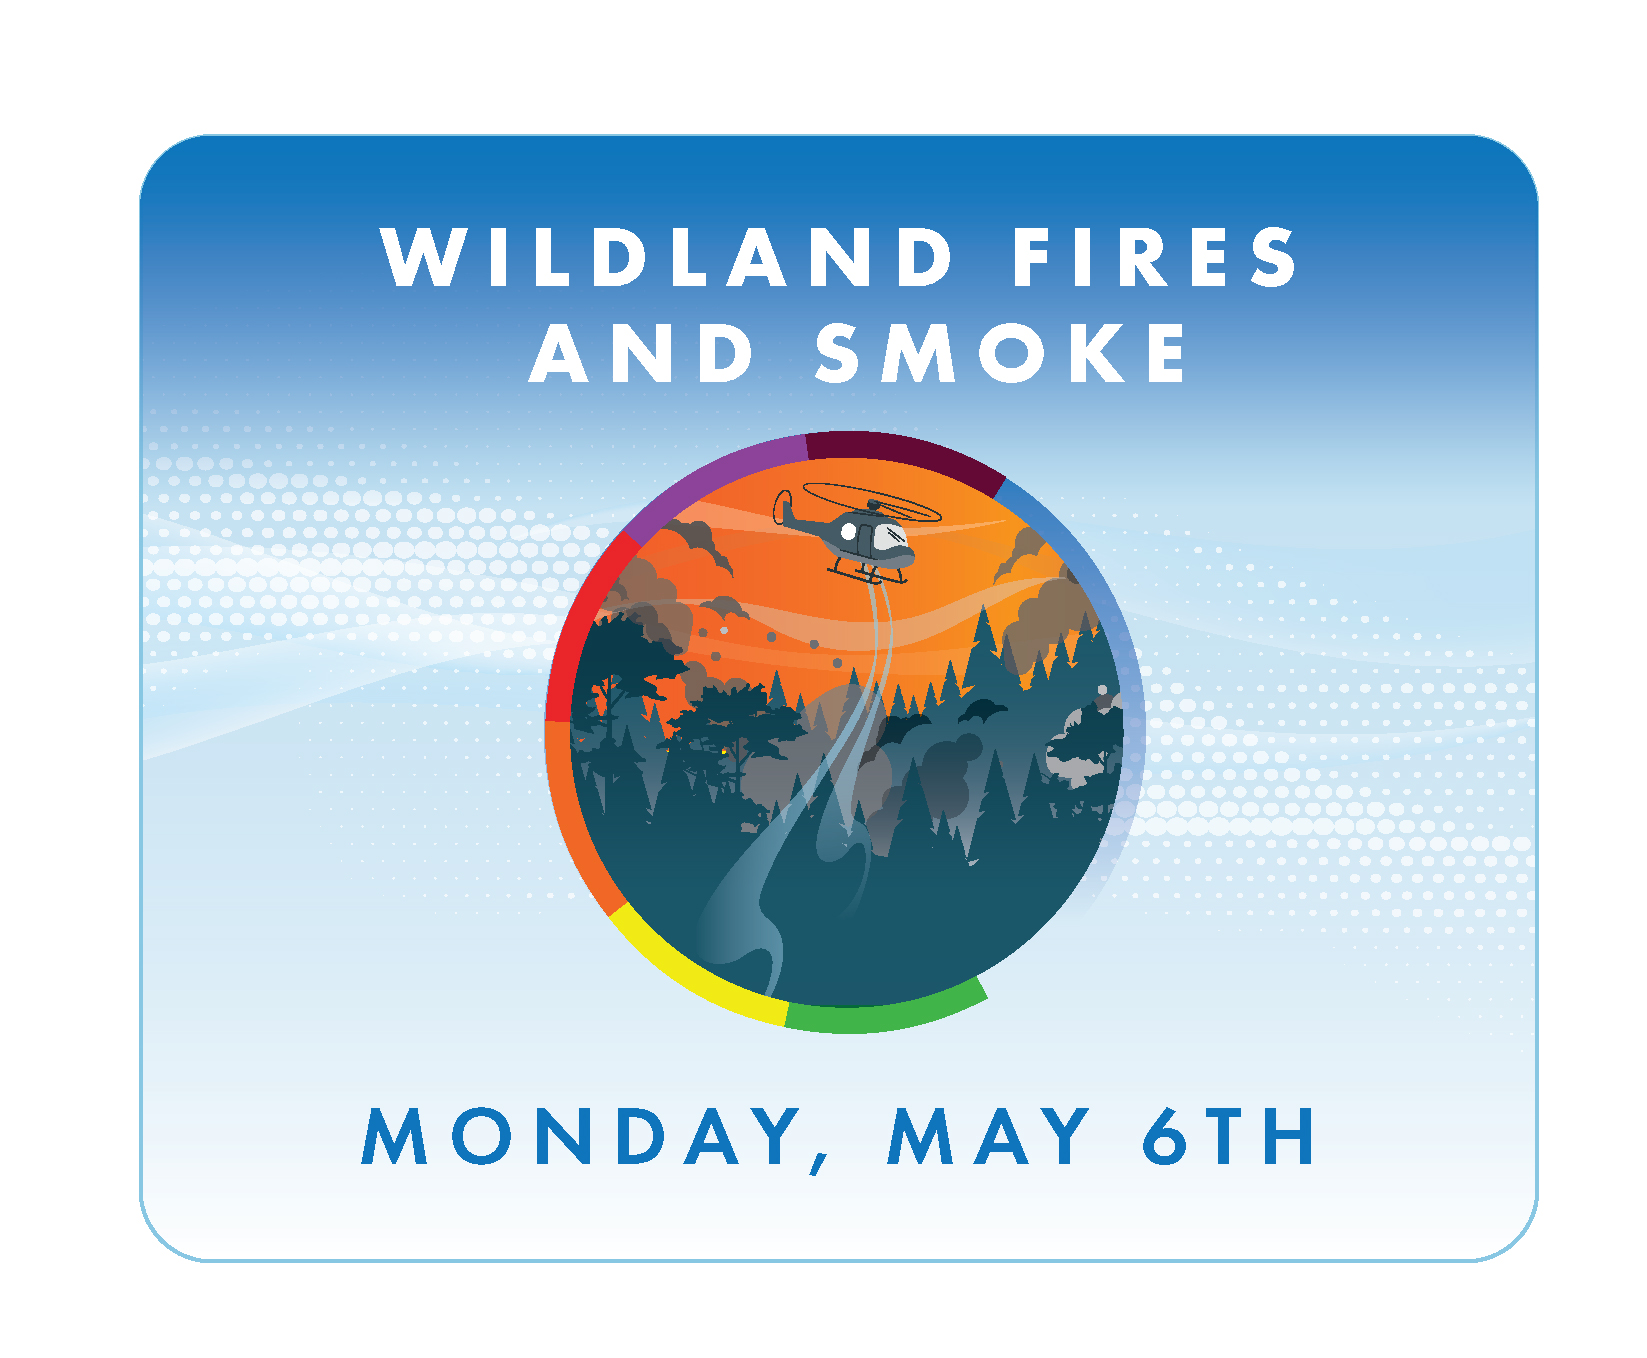 Logo for Monday of AQAW 2024. The theme “Wildland Fires and Smoke” is depicted with an image of a helicopter putting out a forest fire